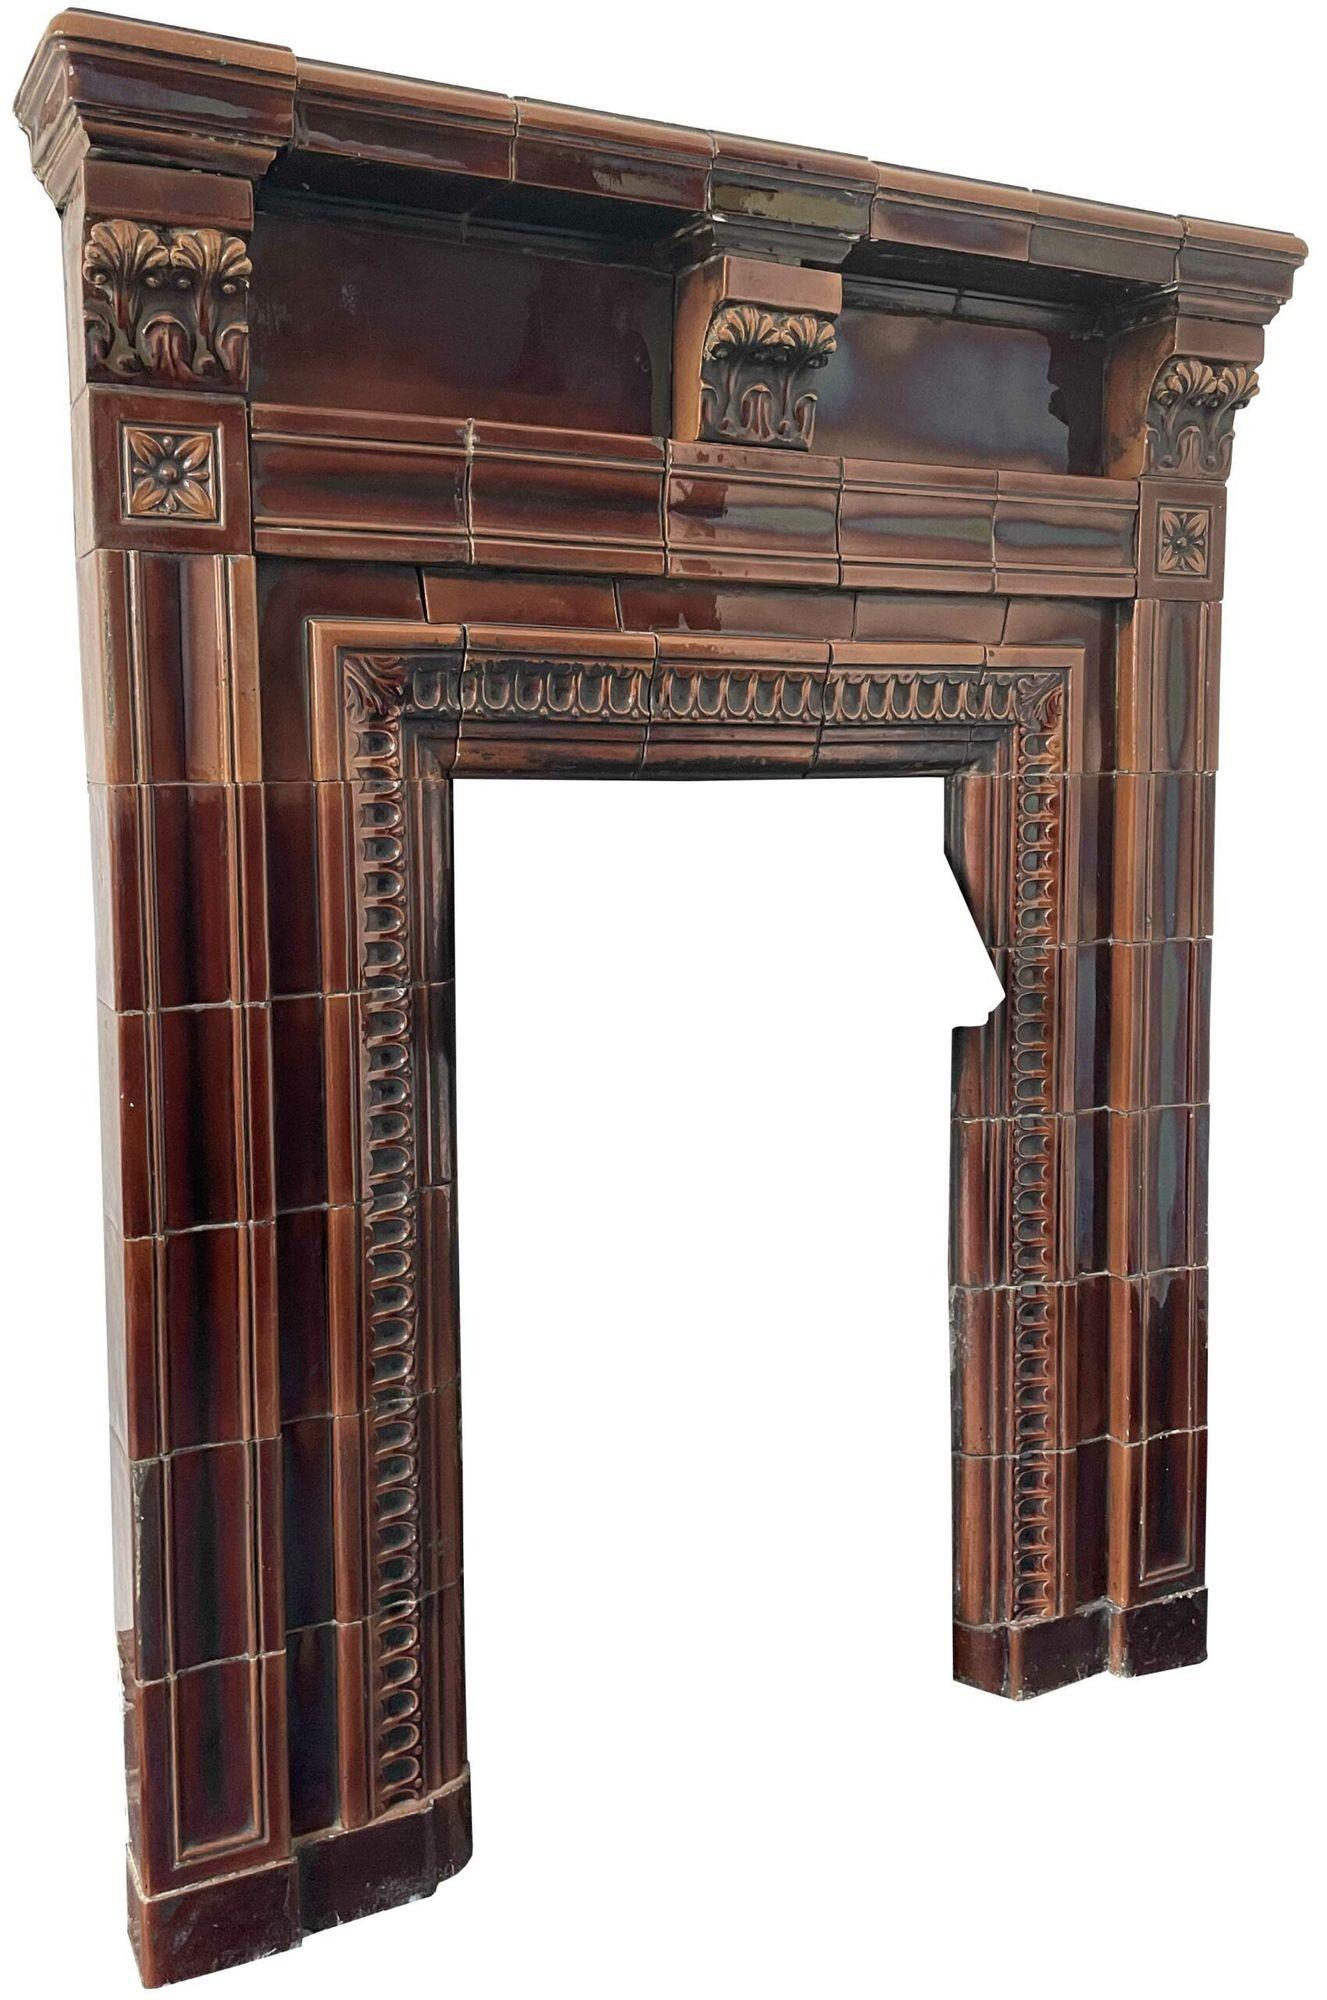 English Reclaimed Brown Glazed Ceramic Fire Mantel For Sale